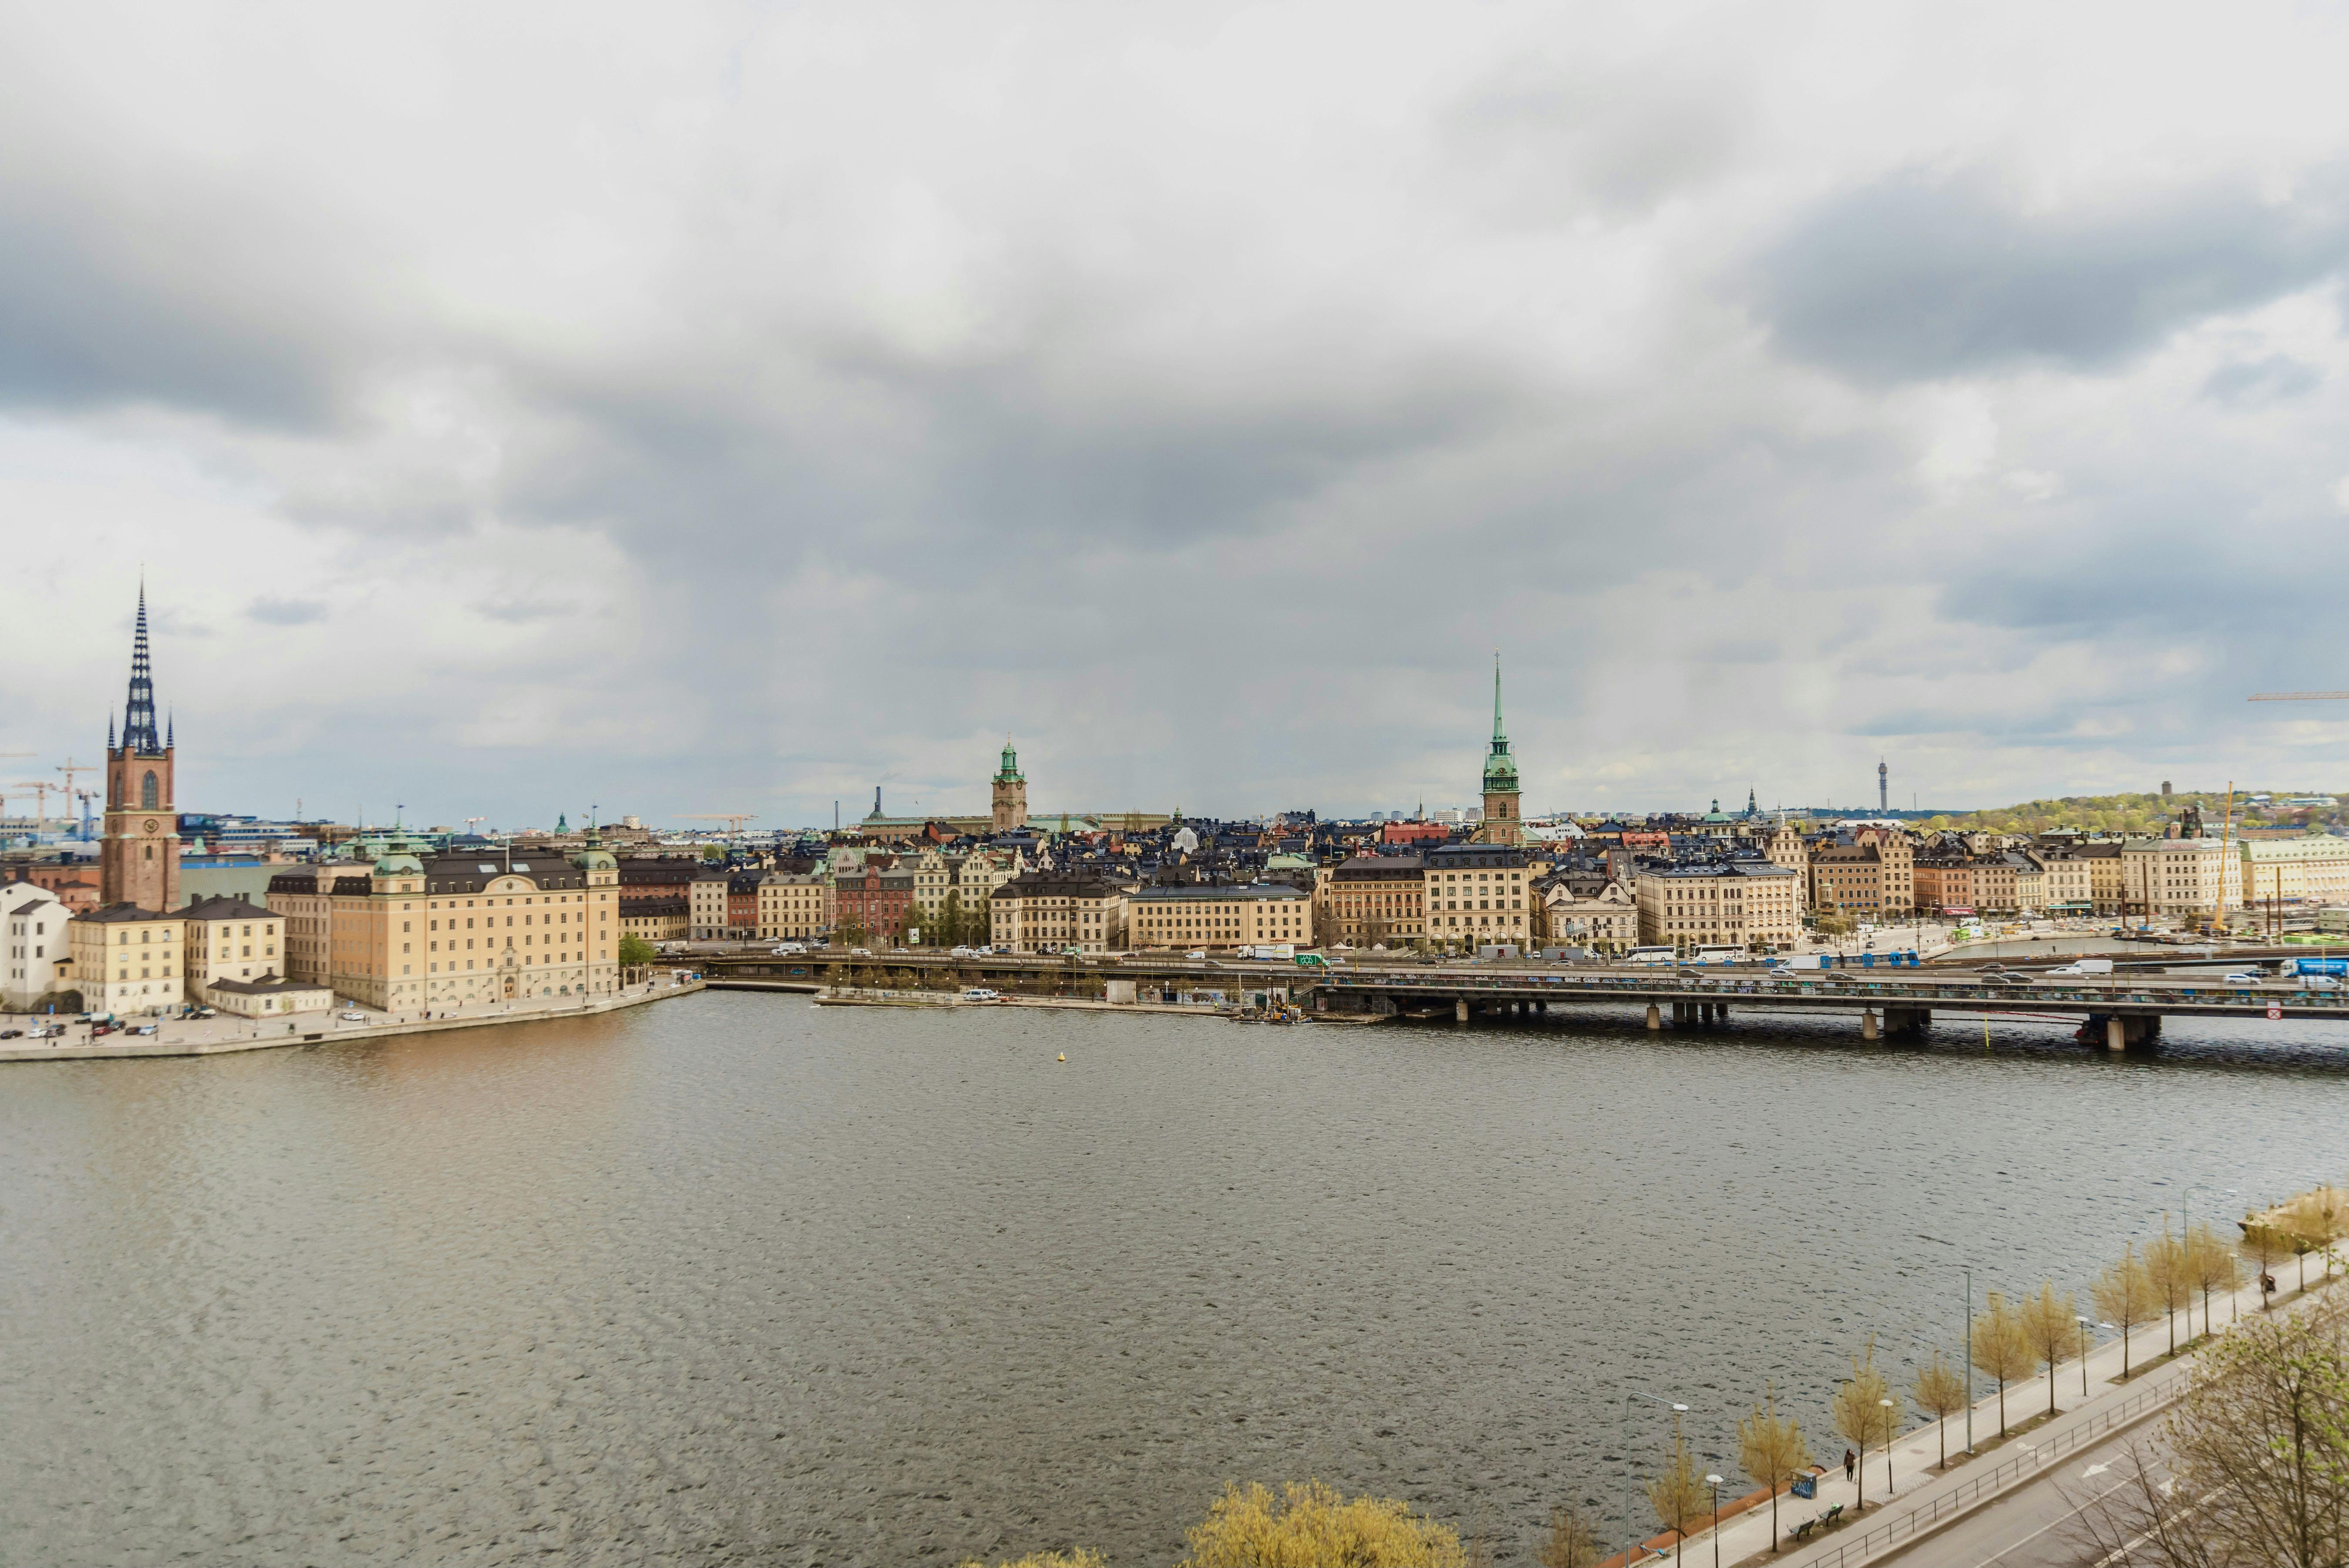 Kickstart your trip to Stockholm with a local - private and personalized tour